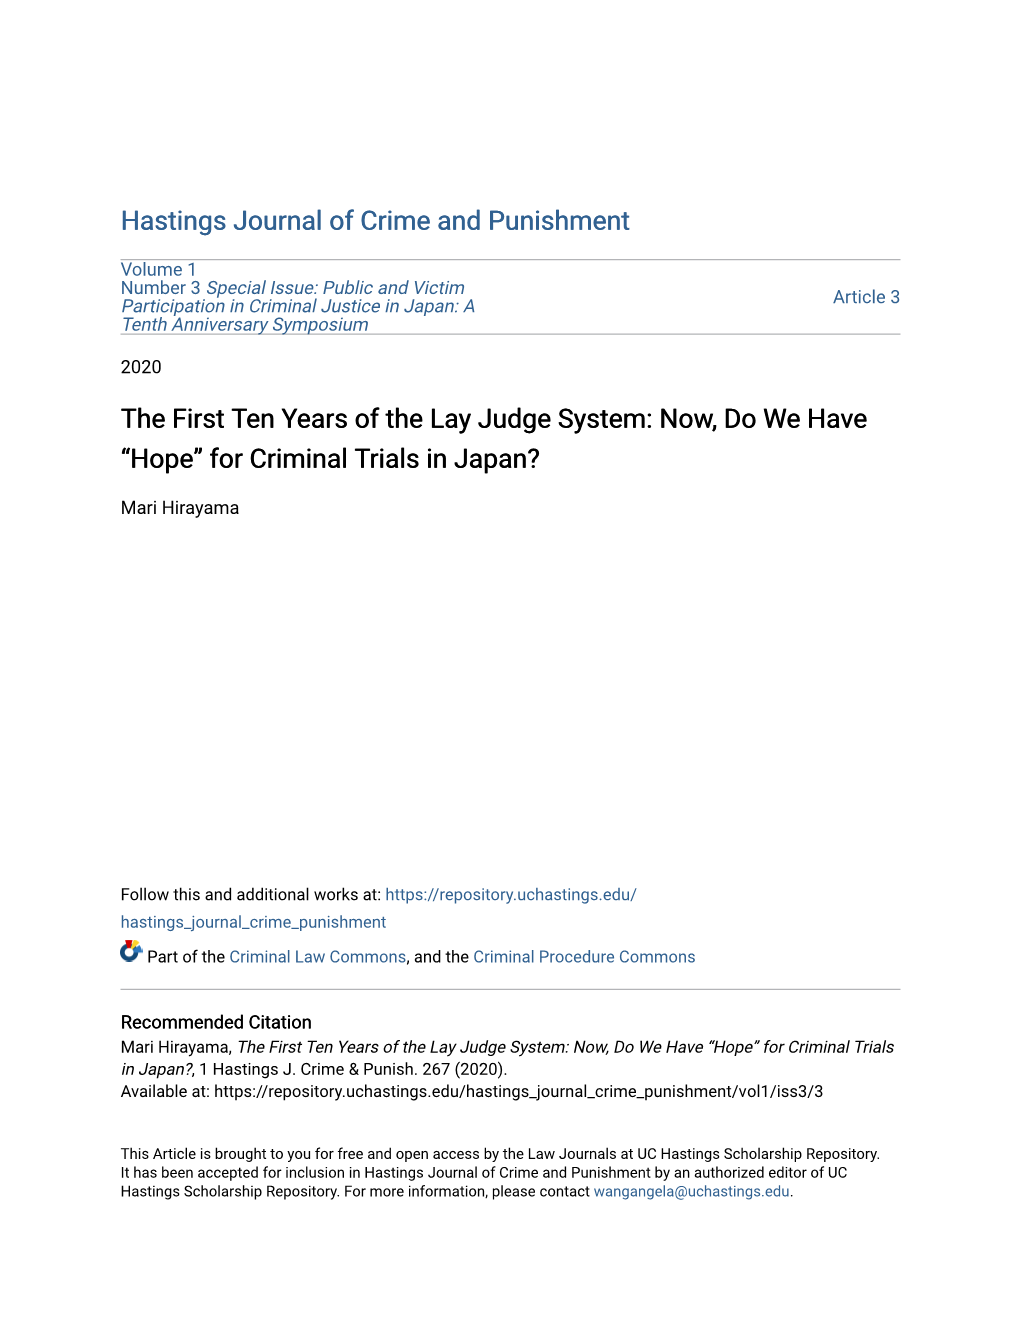 The First Ten Years of the Lay Judge System: Now, Do We Have “Hope” for Criminal Trials in Japan?